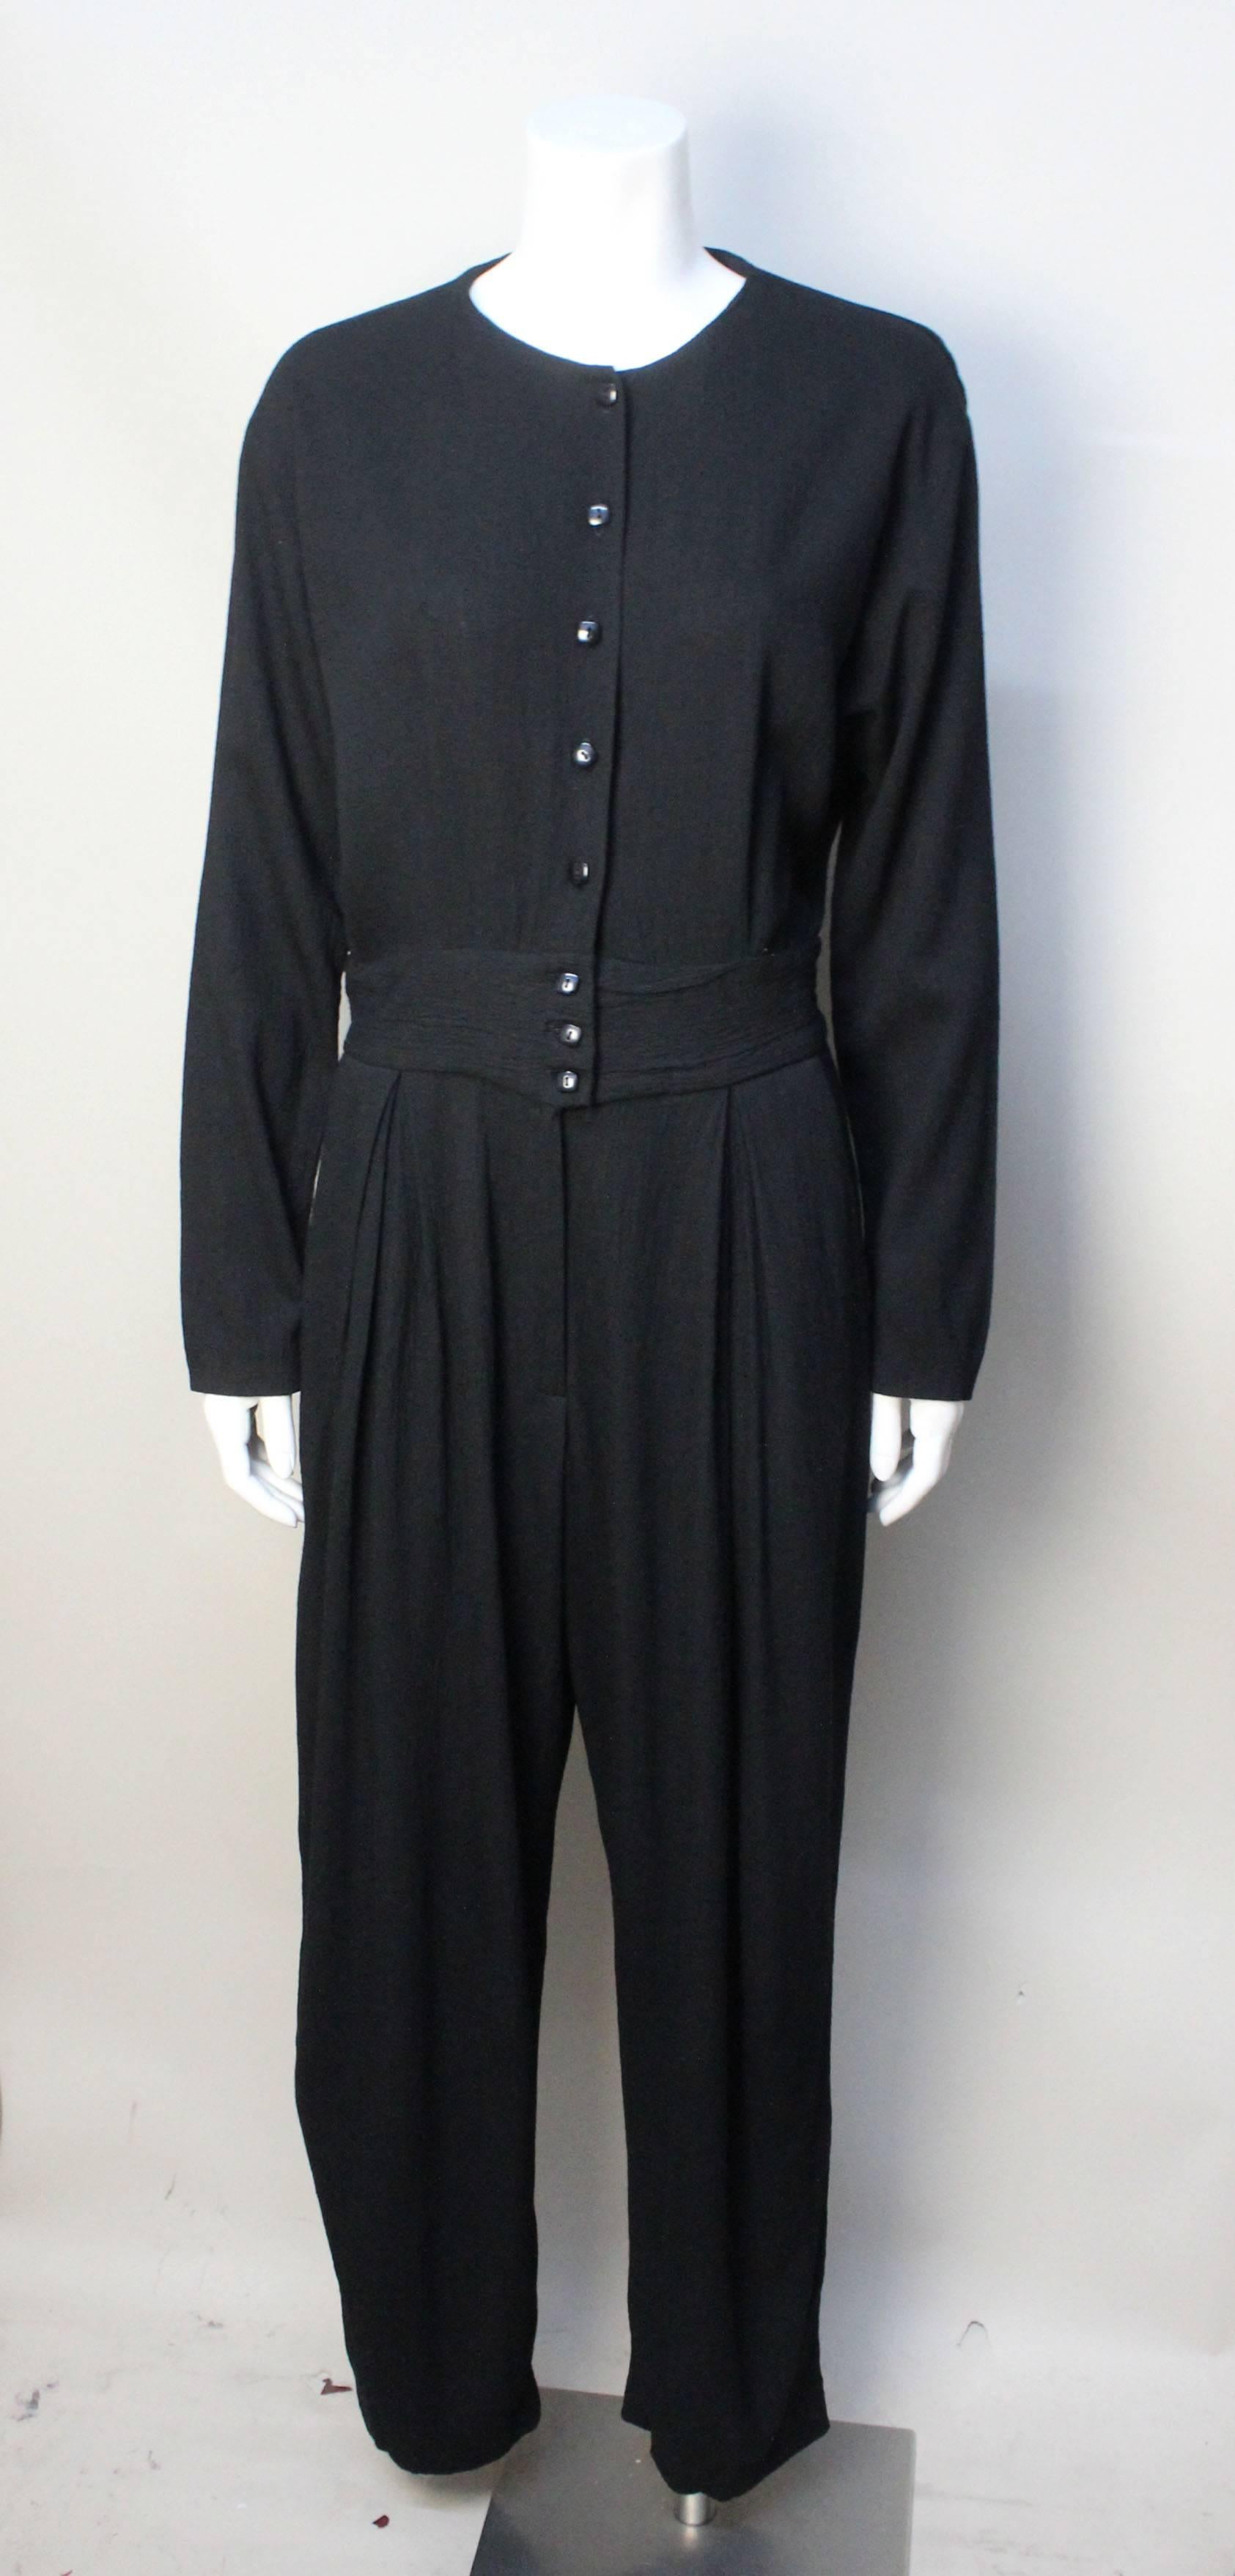 Geoffrey Beene found inspiration in everyday utilitarian clothing and uniforms. This jumpsuit appears to be based on a mechanics coverall, but styled in a feminine fashion. The fabric is a drapey rayon with a bit of lycra stretch to it. It has a